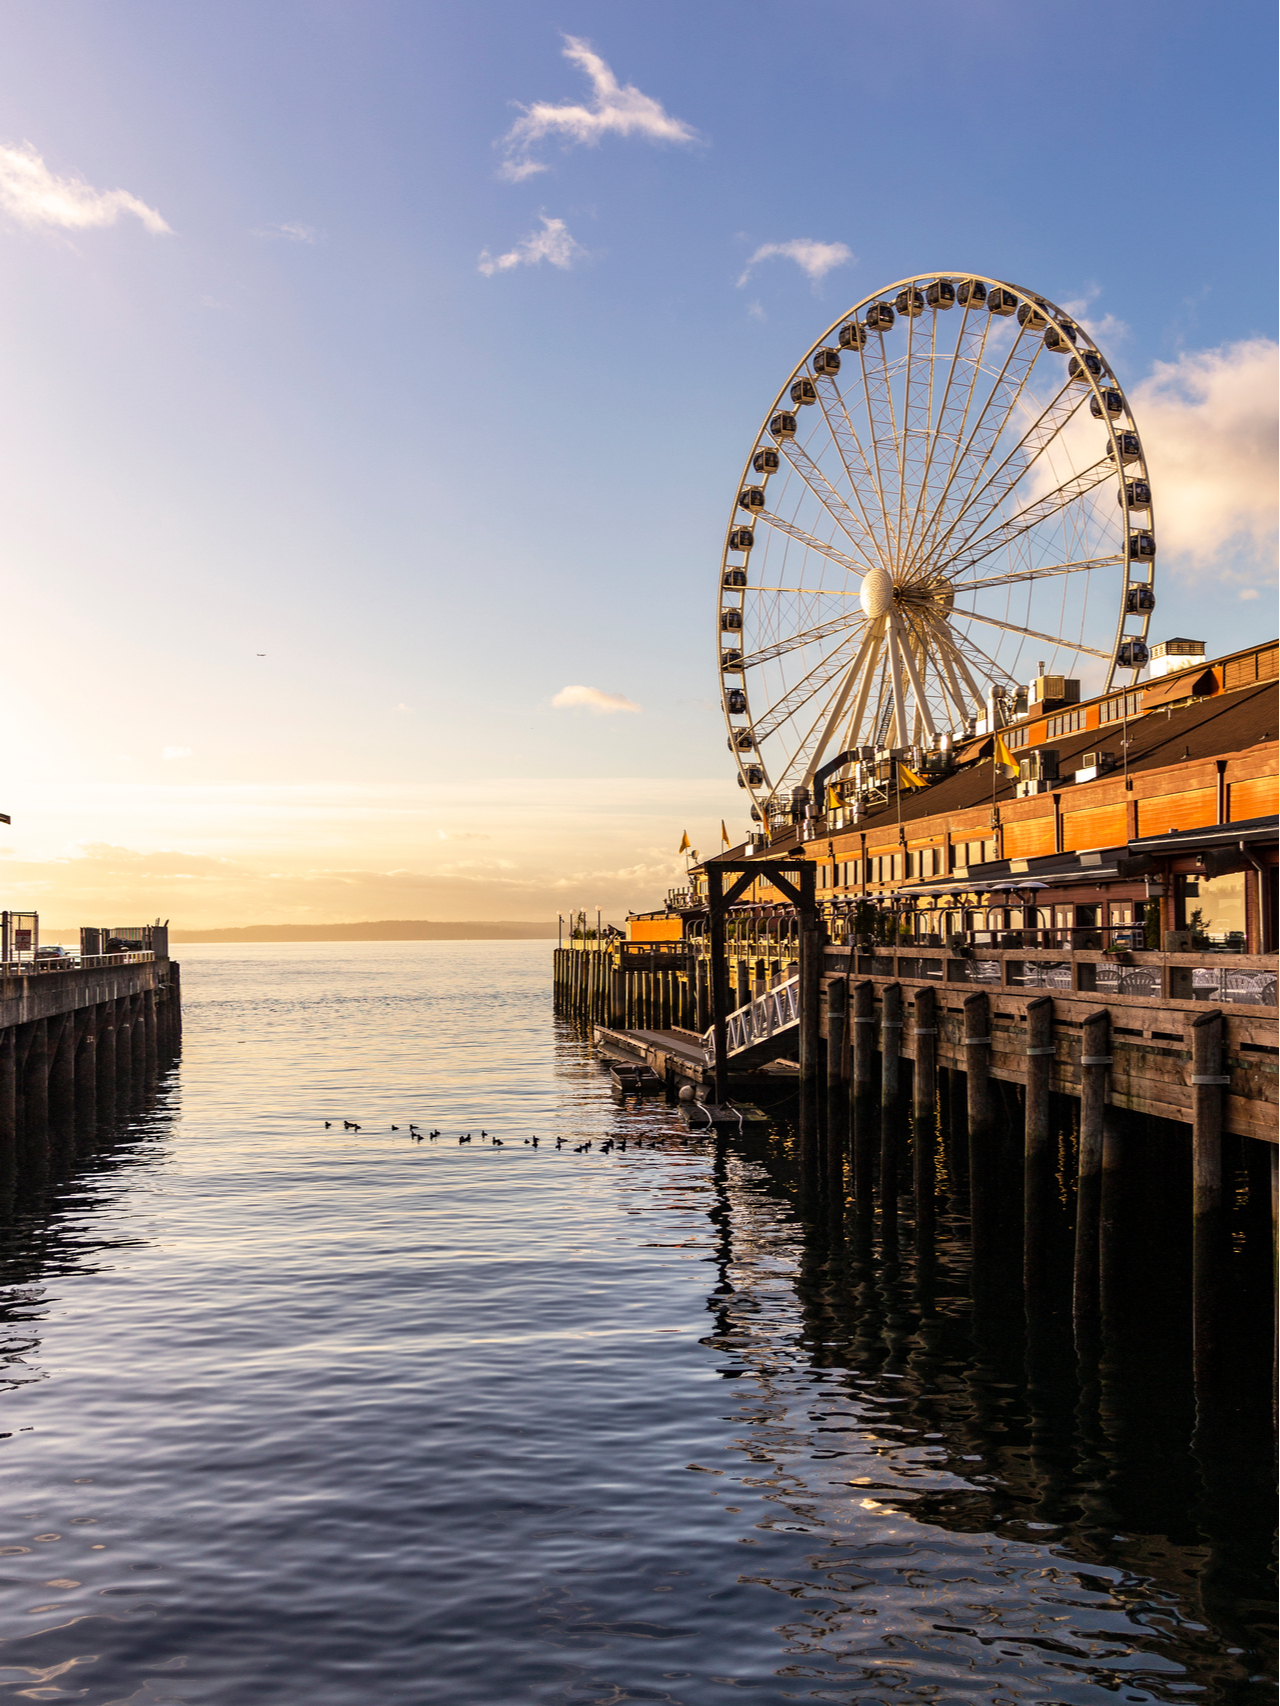 Great wheel, one of the best things to do in Seattle, at sunset